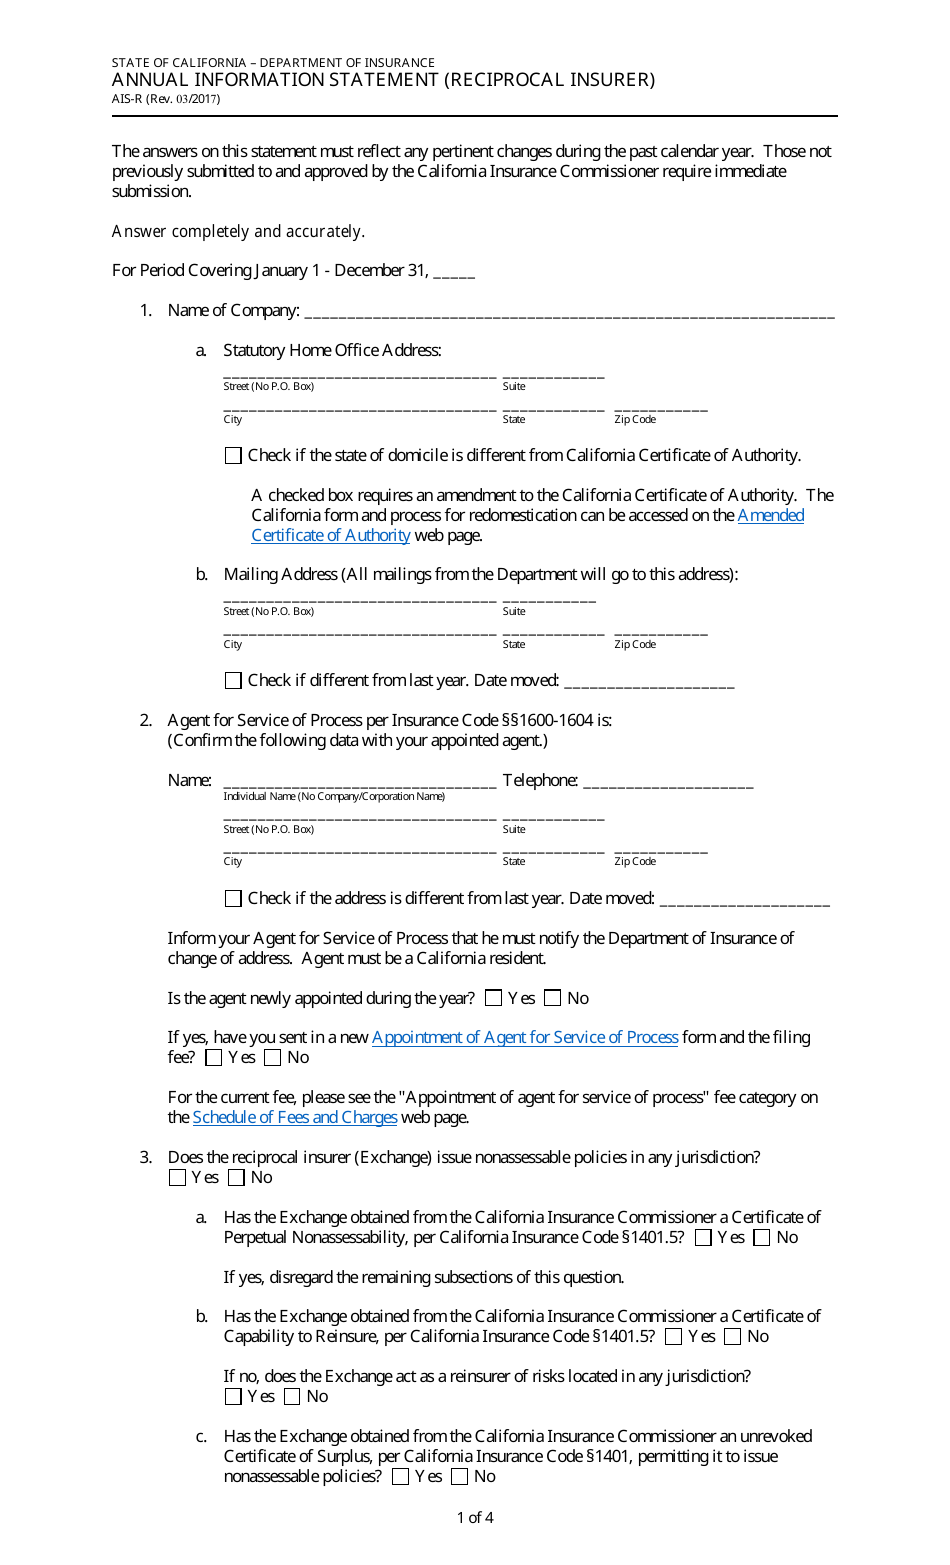 Form AIS-R Annual Information Statement (Reciprocal Insurer) - California, Page 1